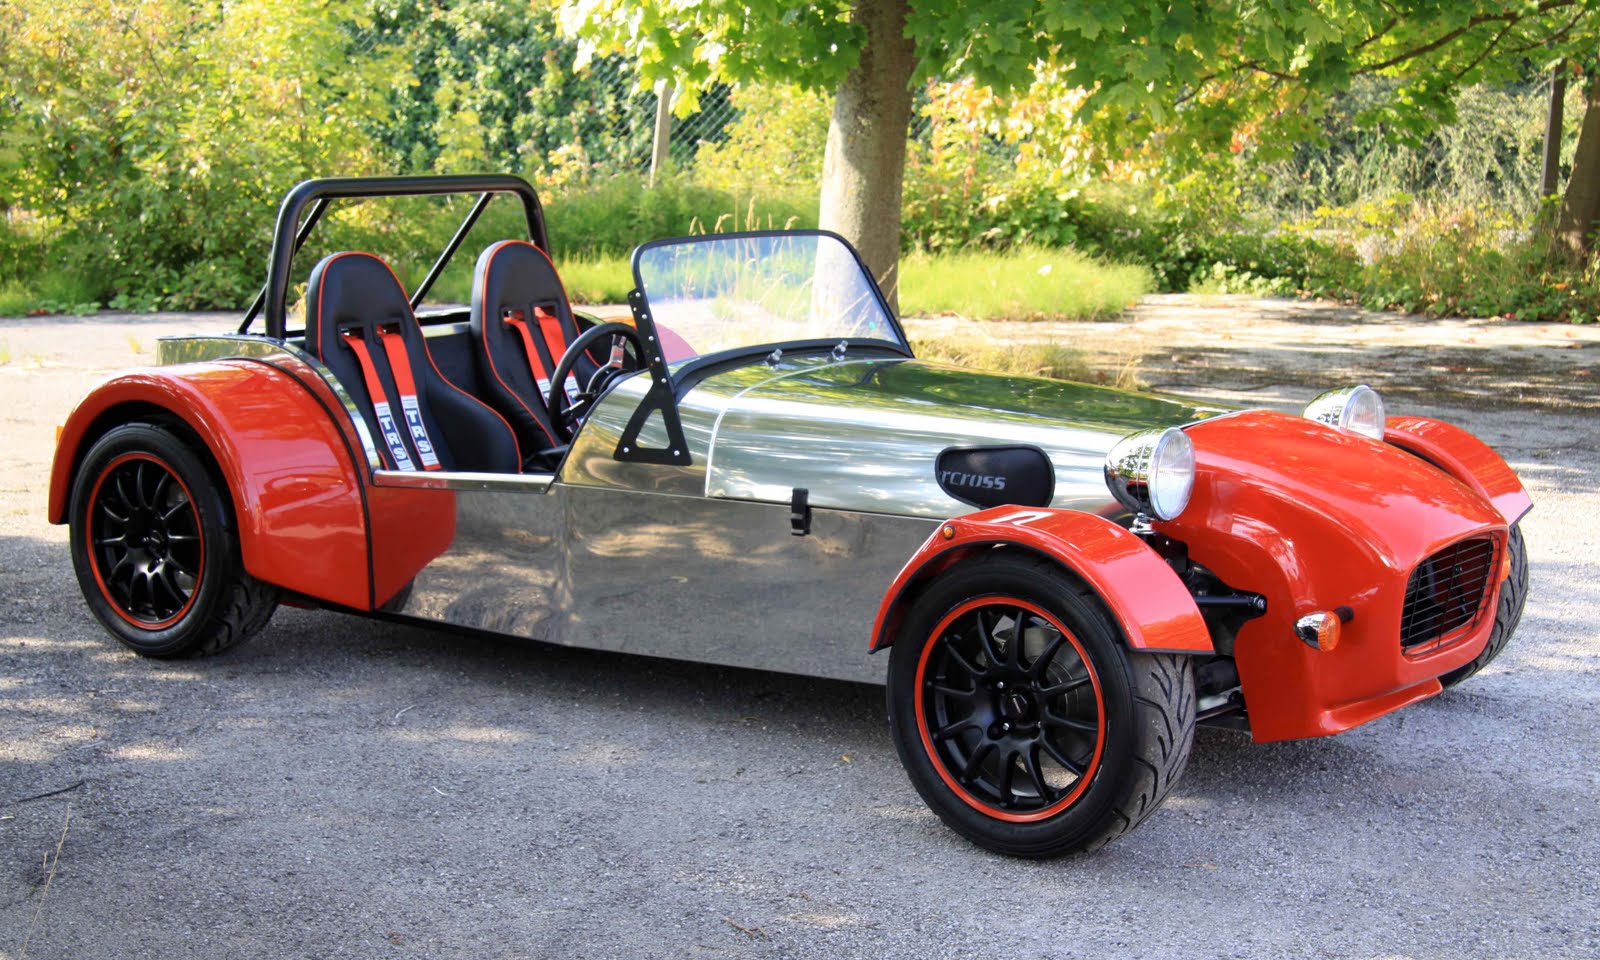 Great British Sports Cars Ltd: GBS IS AT EXETER KIT CAR SHOW THIS